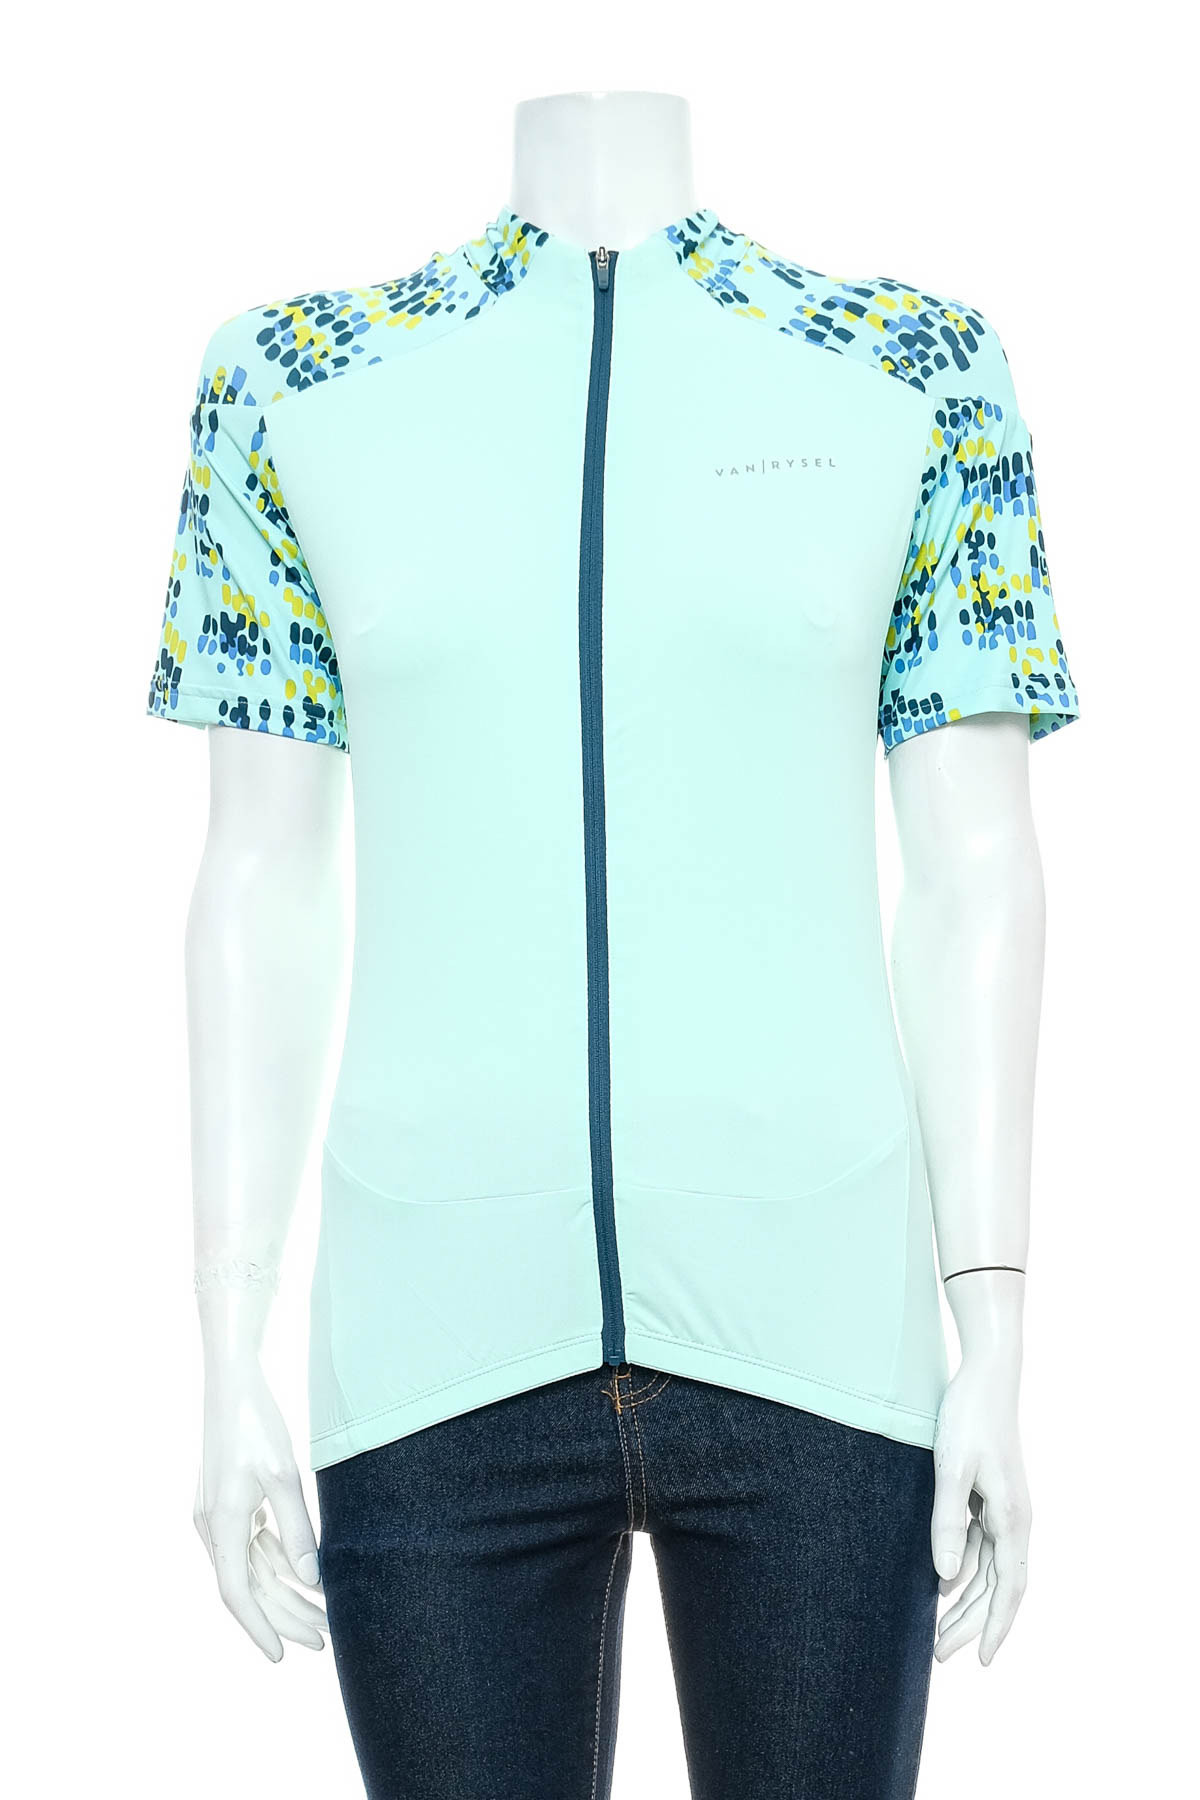 Female sports top for cycling - VAN RYSEL - 0